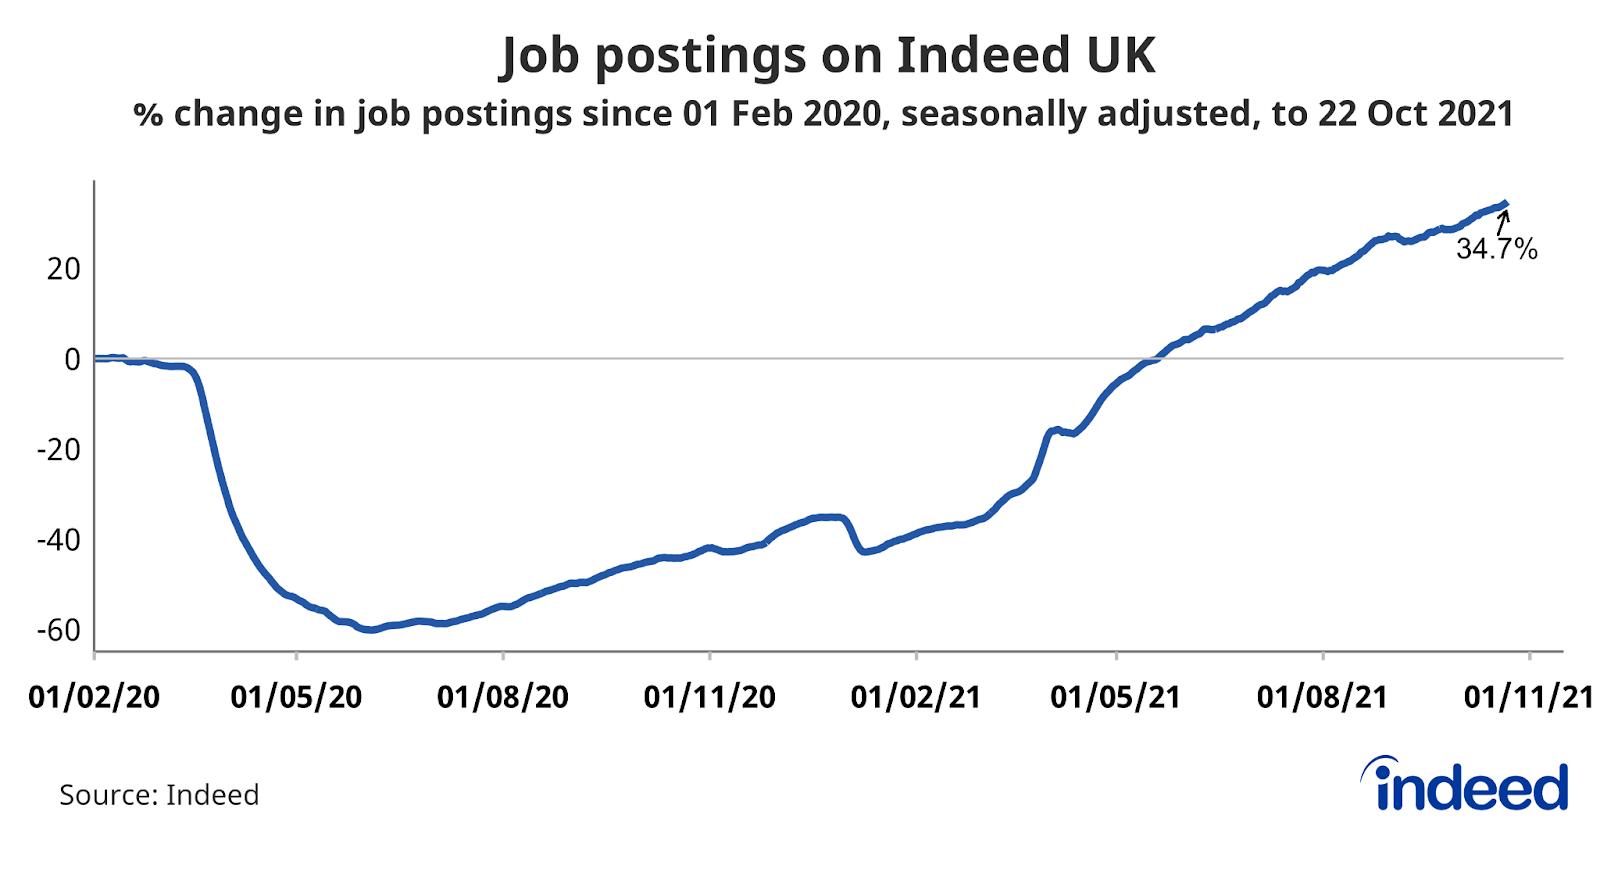 A line graph titled “Job postings on Indeed UK” 